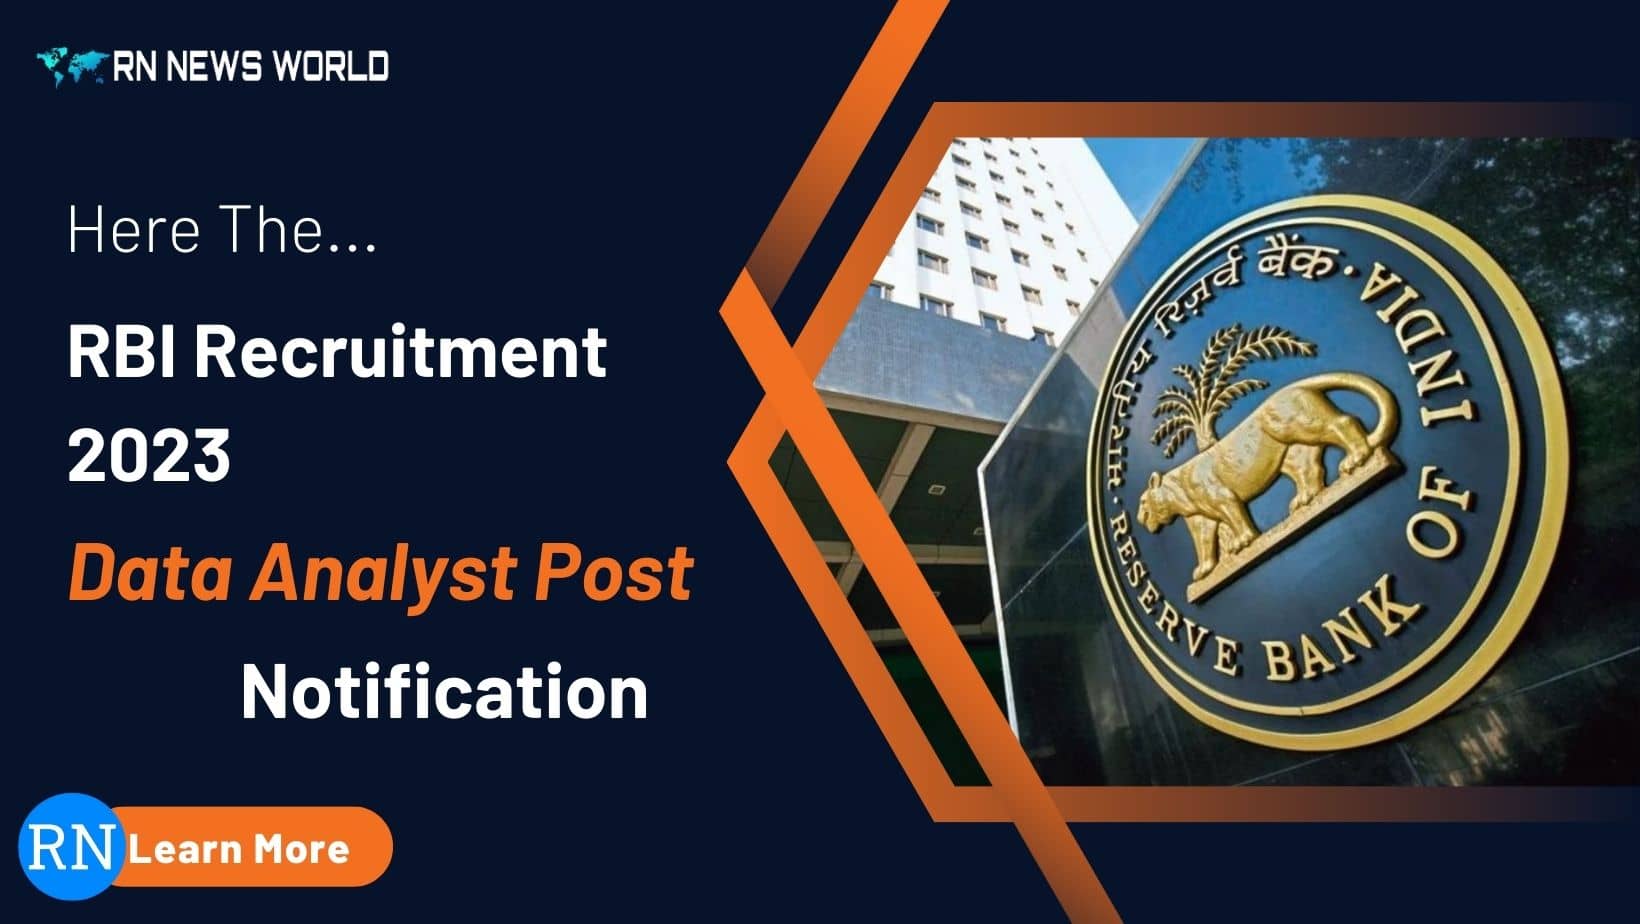 RBI Recruitment 2023: Apply online for the job of RBI Data Analyst in 2023 of 66 post vacancy of Data Scientists.